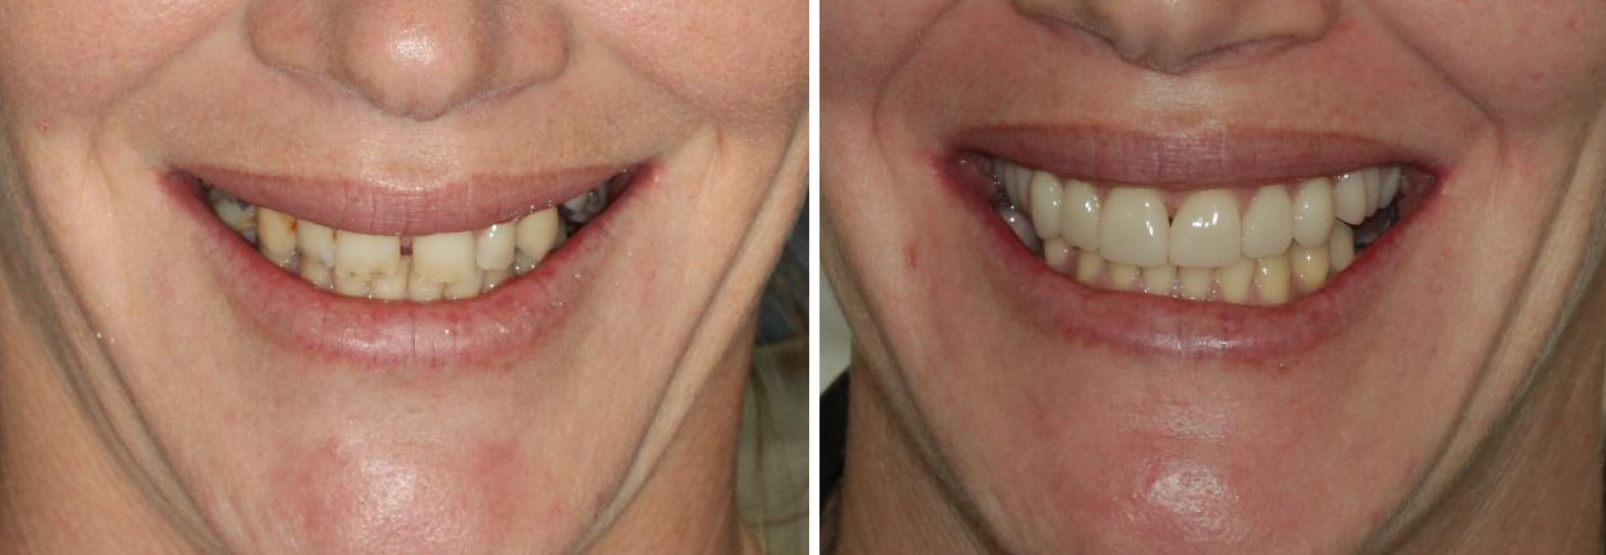 Case 2 - Before and after - Partial Denture